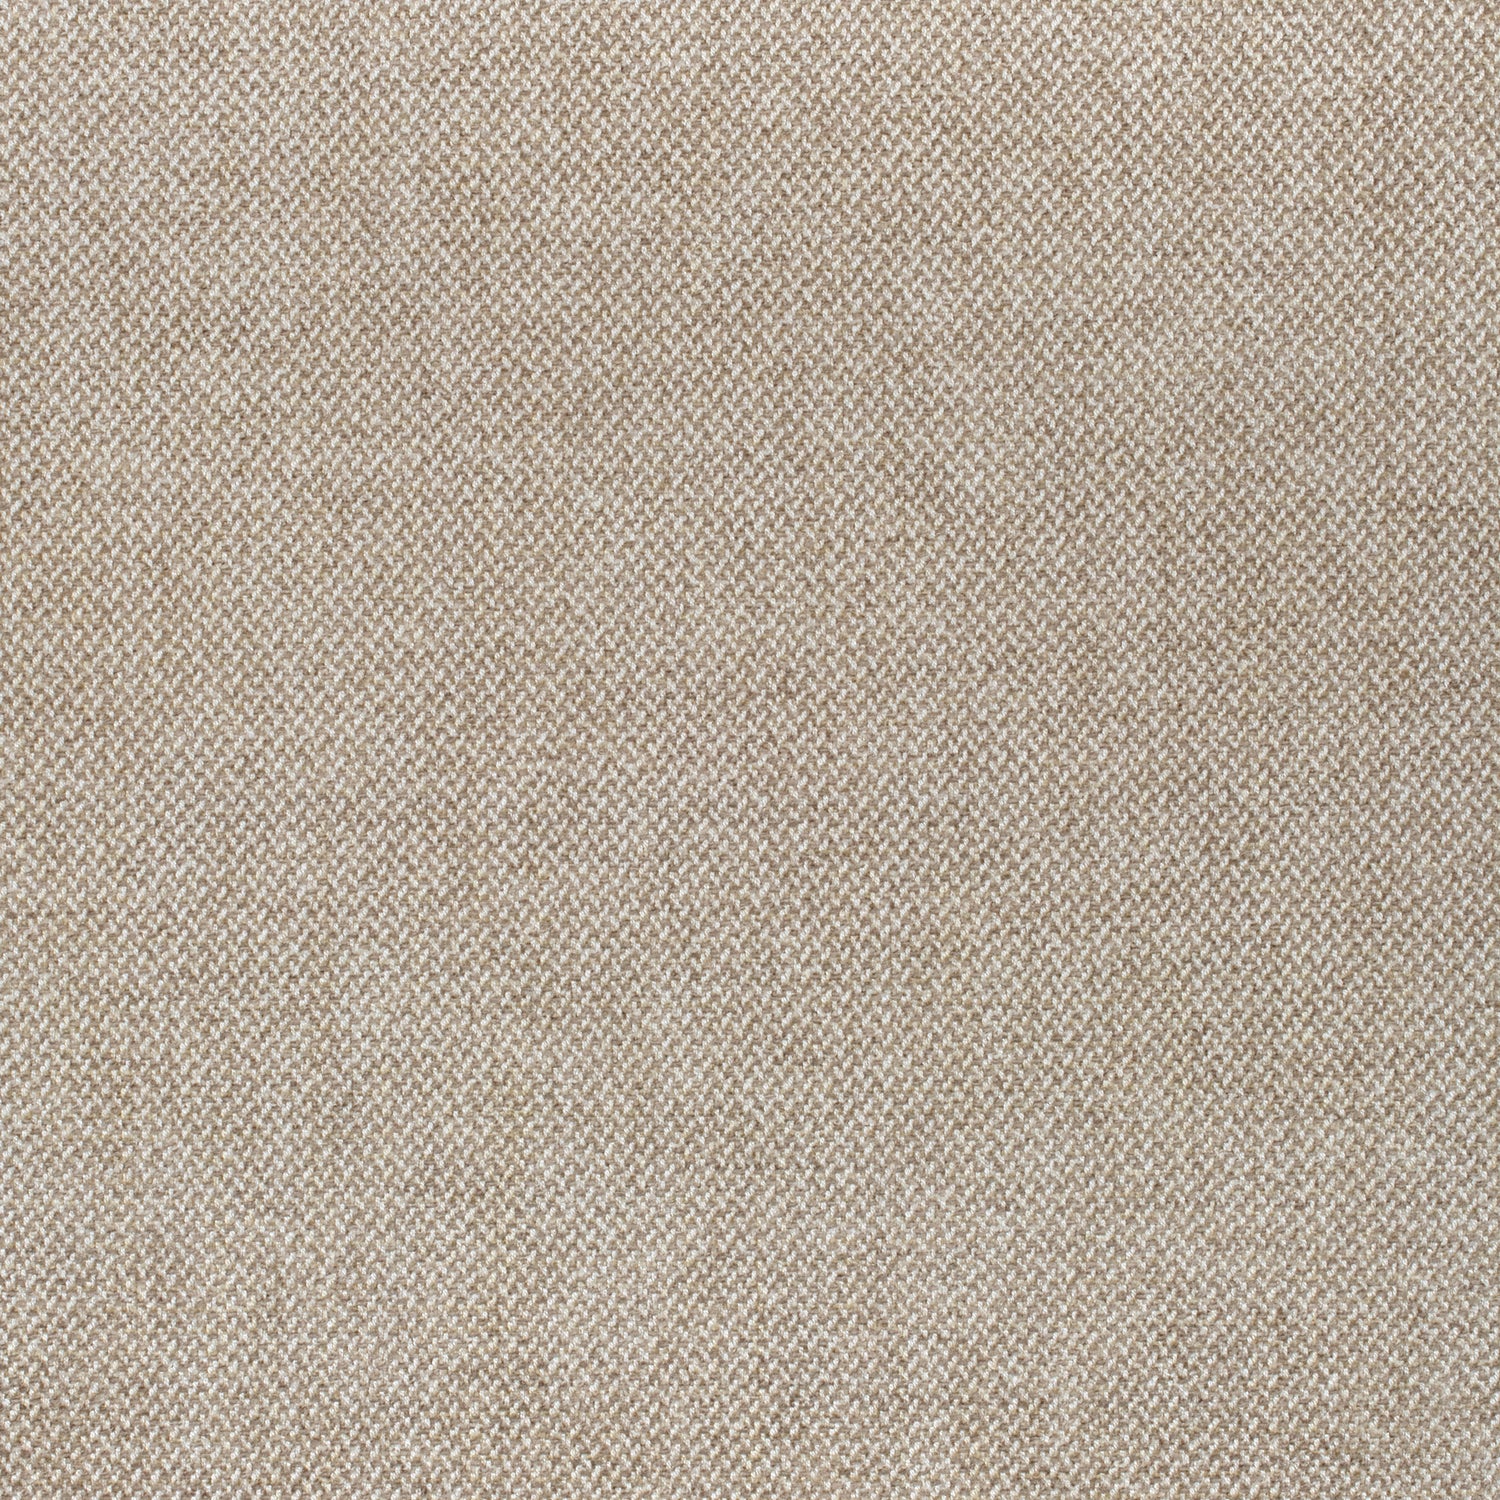 Picco fabric in sand color - pattern number W80703 - by Thibaut in the Woven Resource 11: Rialto collection